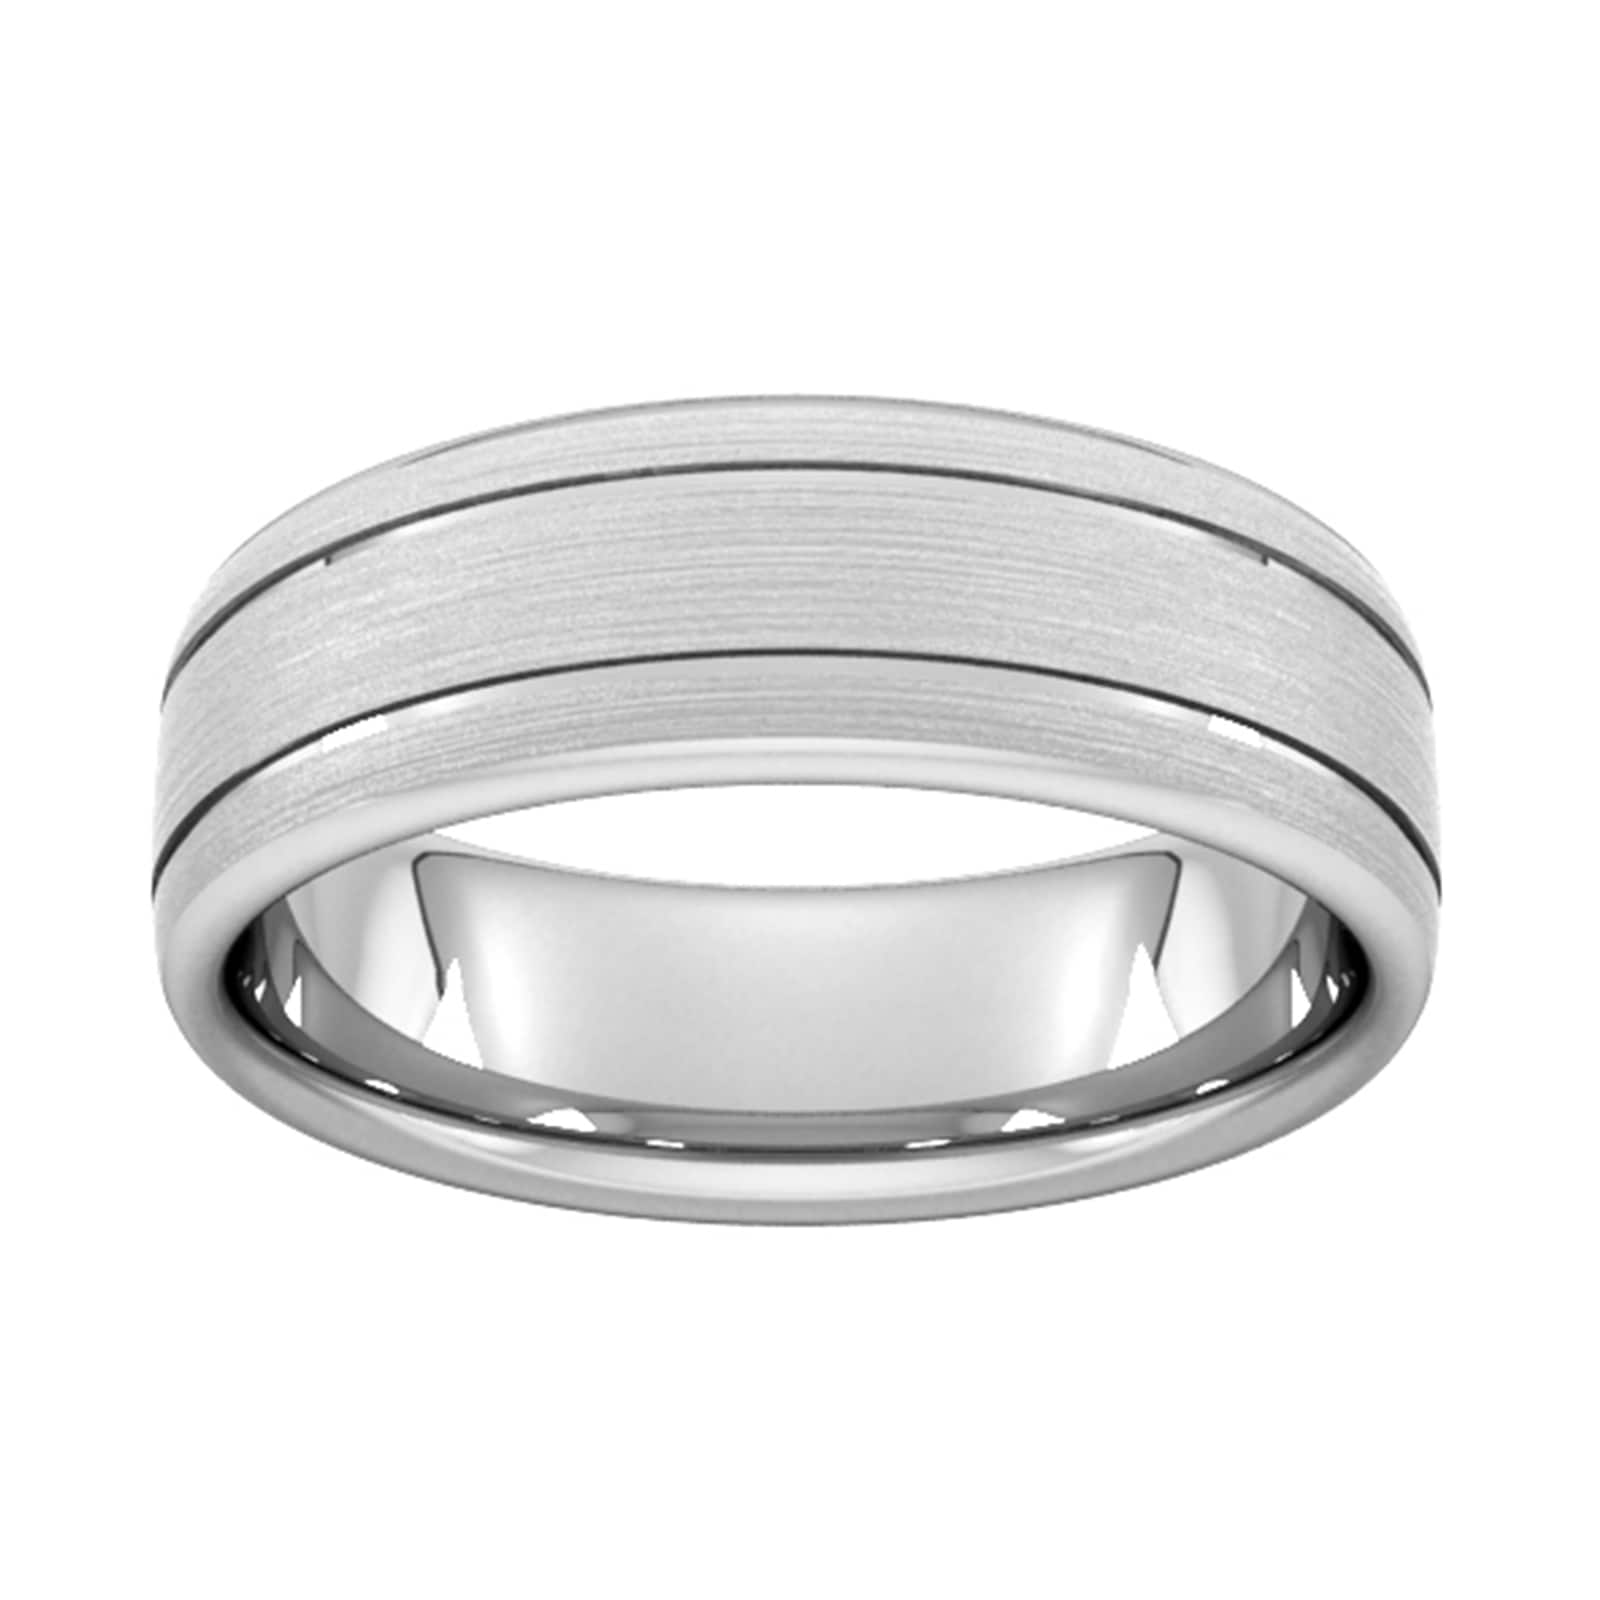 7mm Slight Court Standard Matt Finish With Double Grooves Wedding Ring In Platinum - Ring Size L